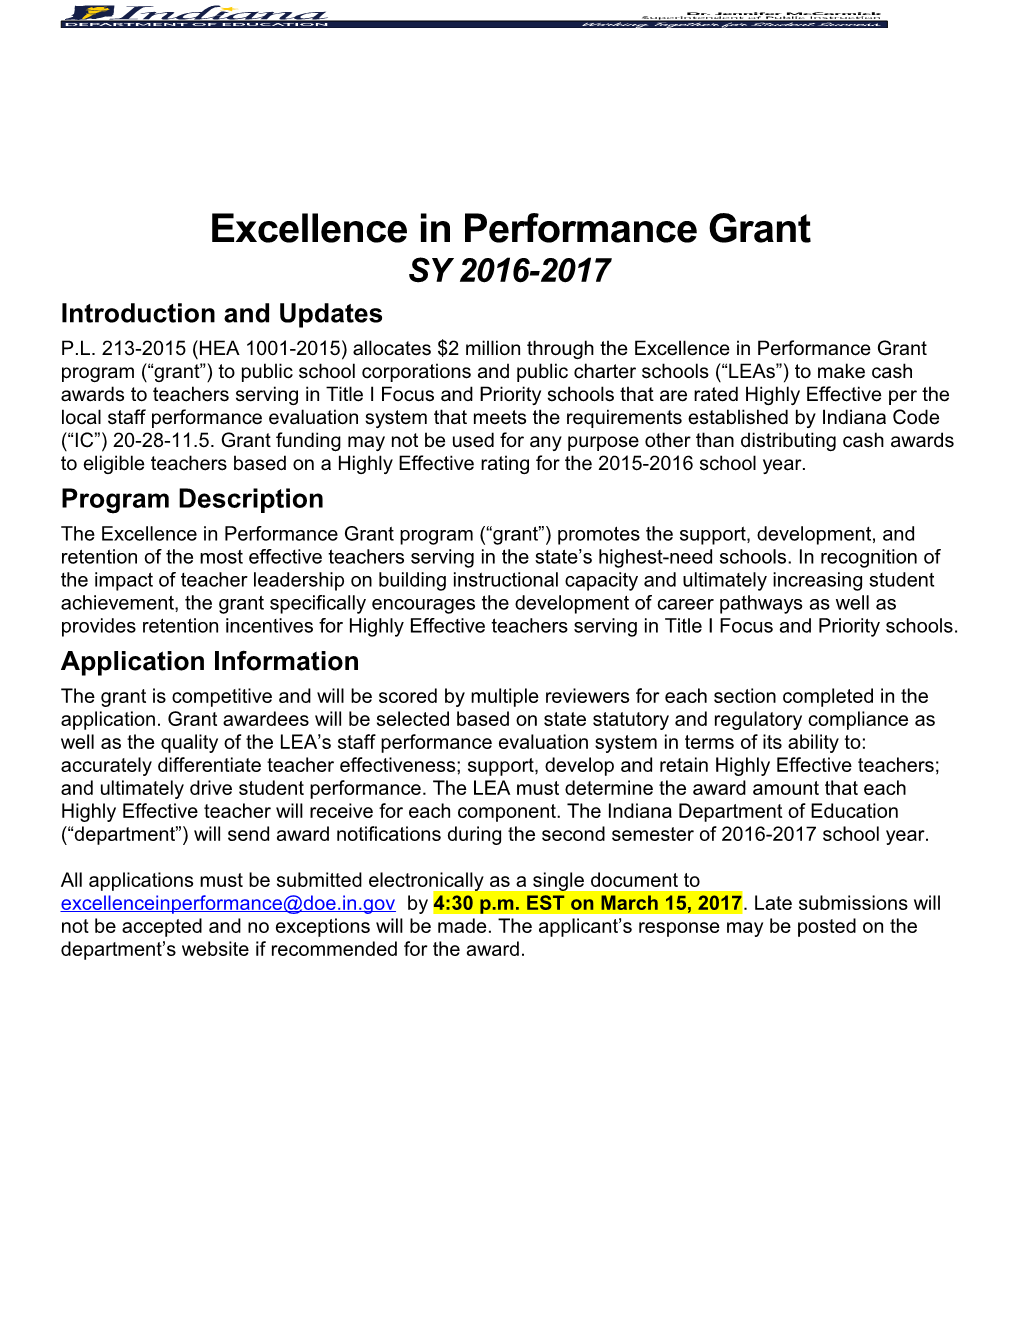 Excellence in Performance Grant